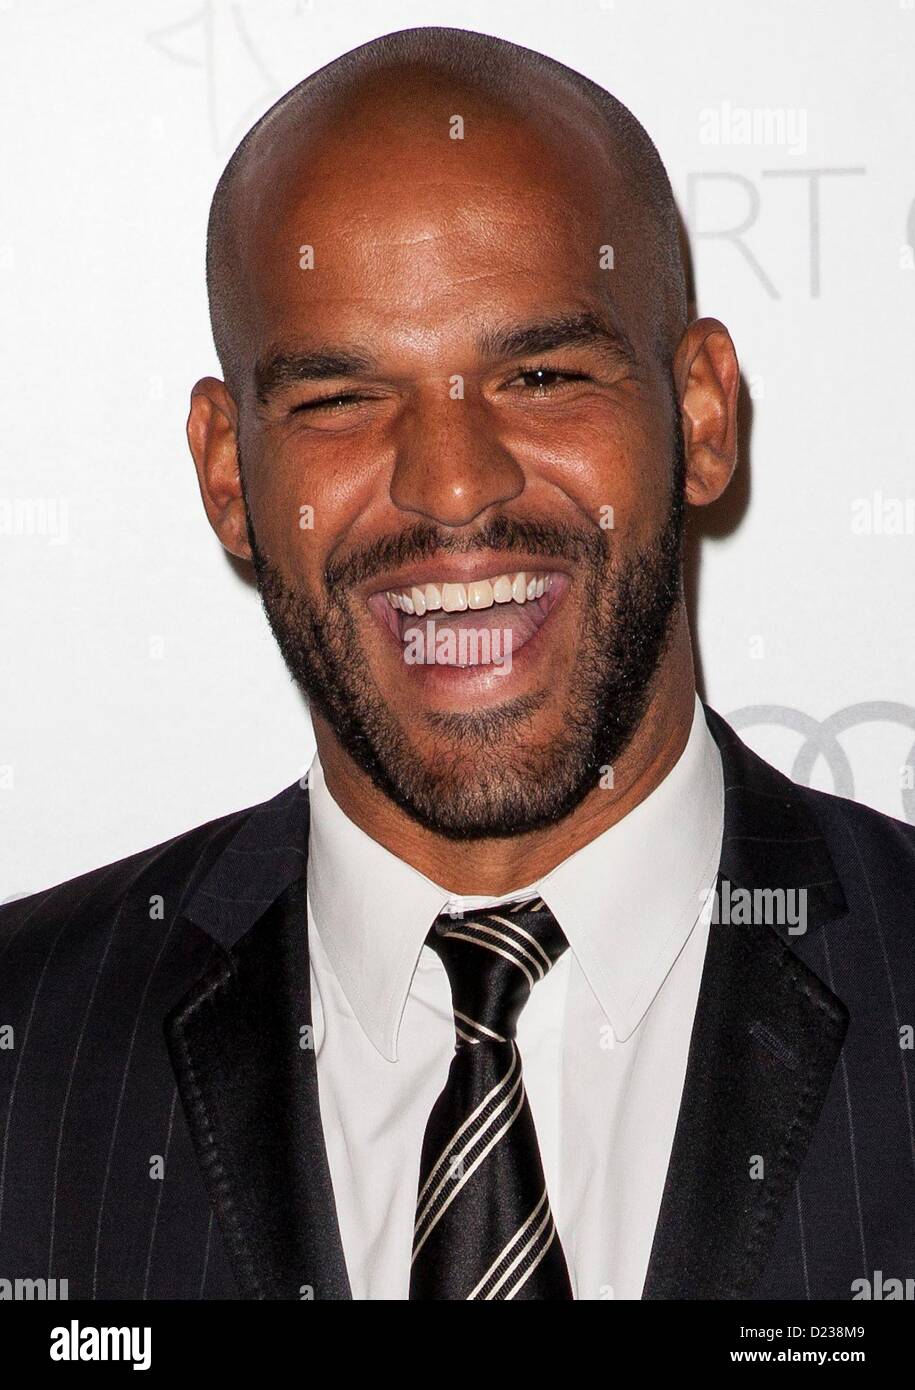 Amaury Nolasco at arrivals for The Art Of Elysium Heaven Gala, 2nd Street Tunnel, Los Angeles, CA January 12, 2013. Photo By: Emiley Schweich/Everett Collection Stock Photo